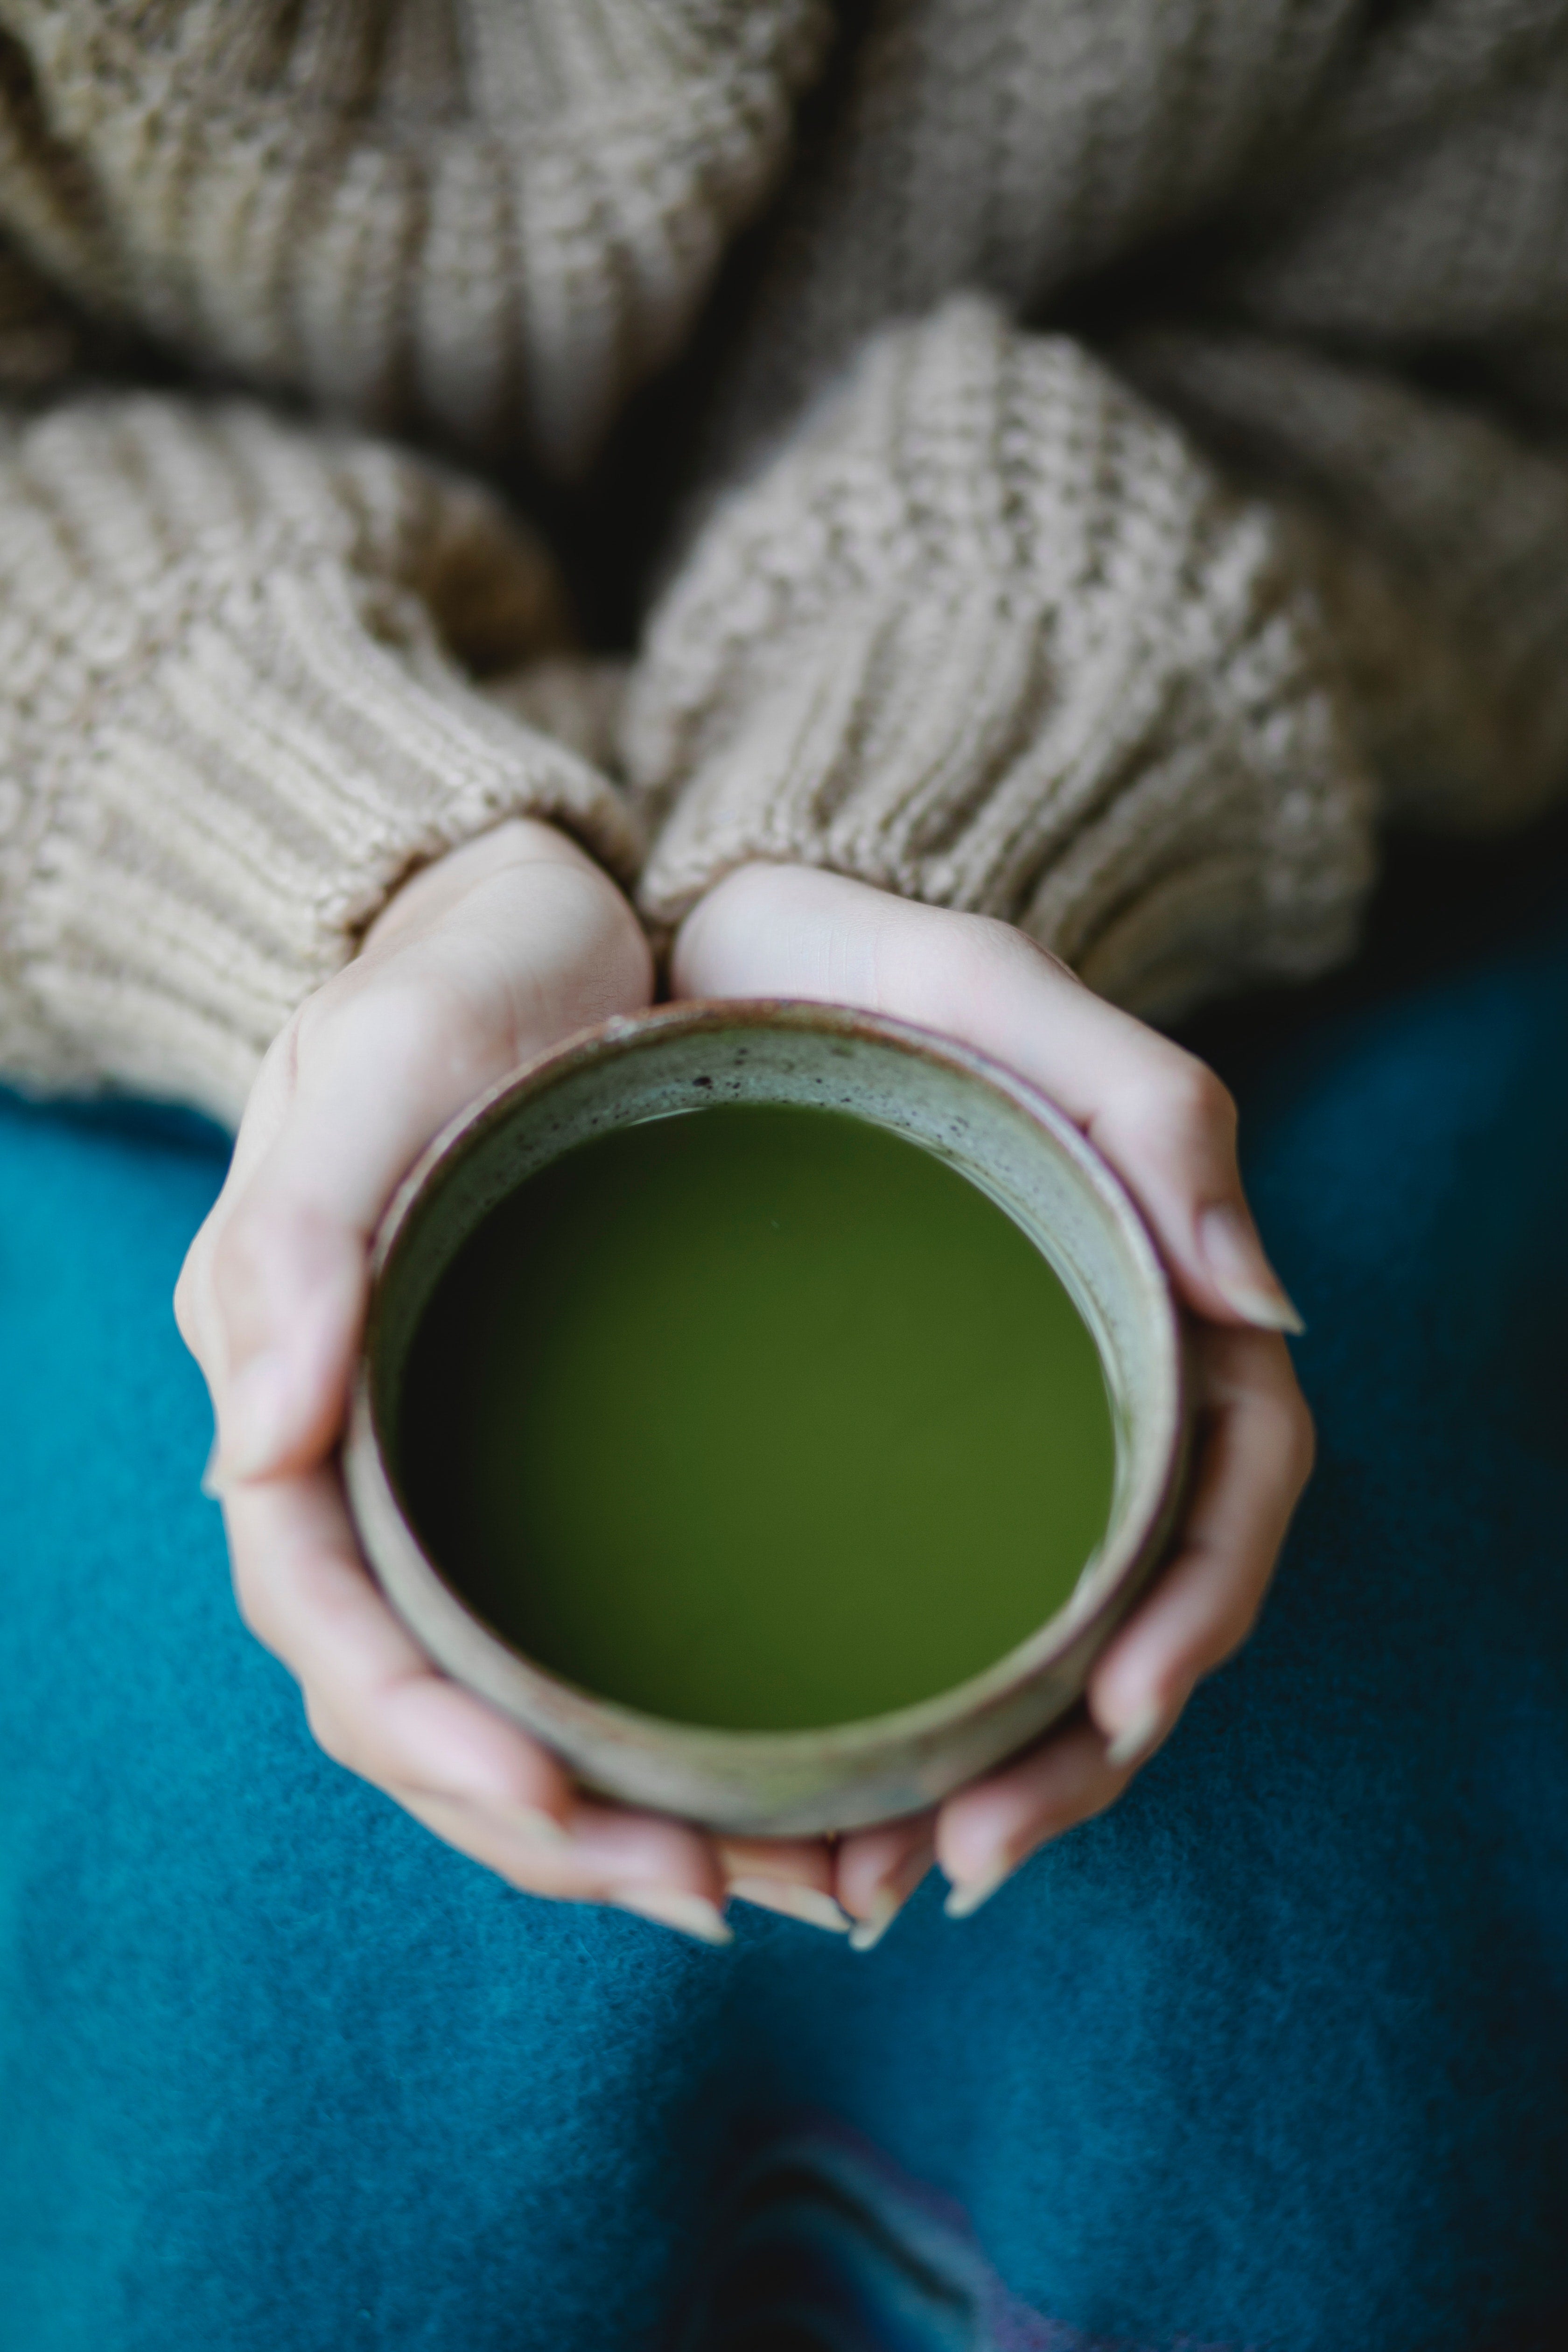 The 5 great Japanese green teas